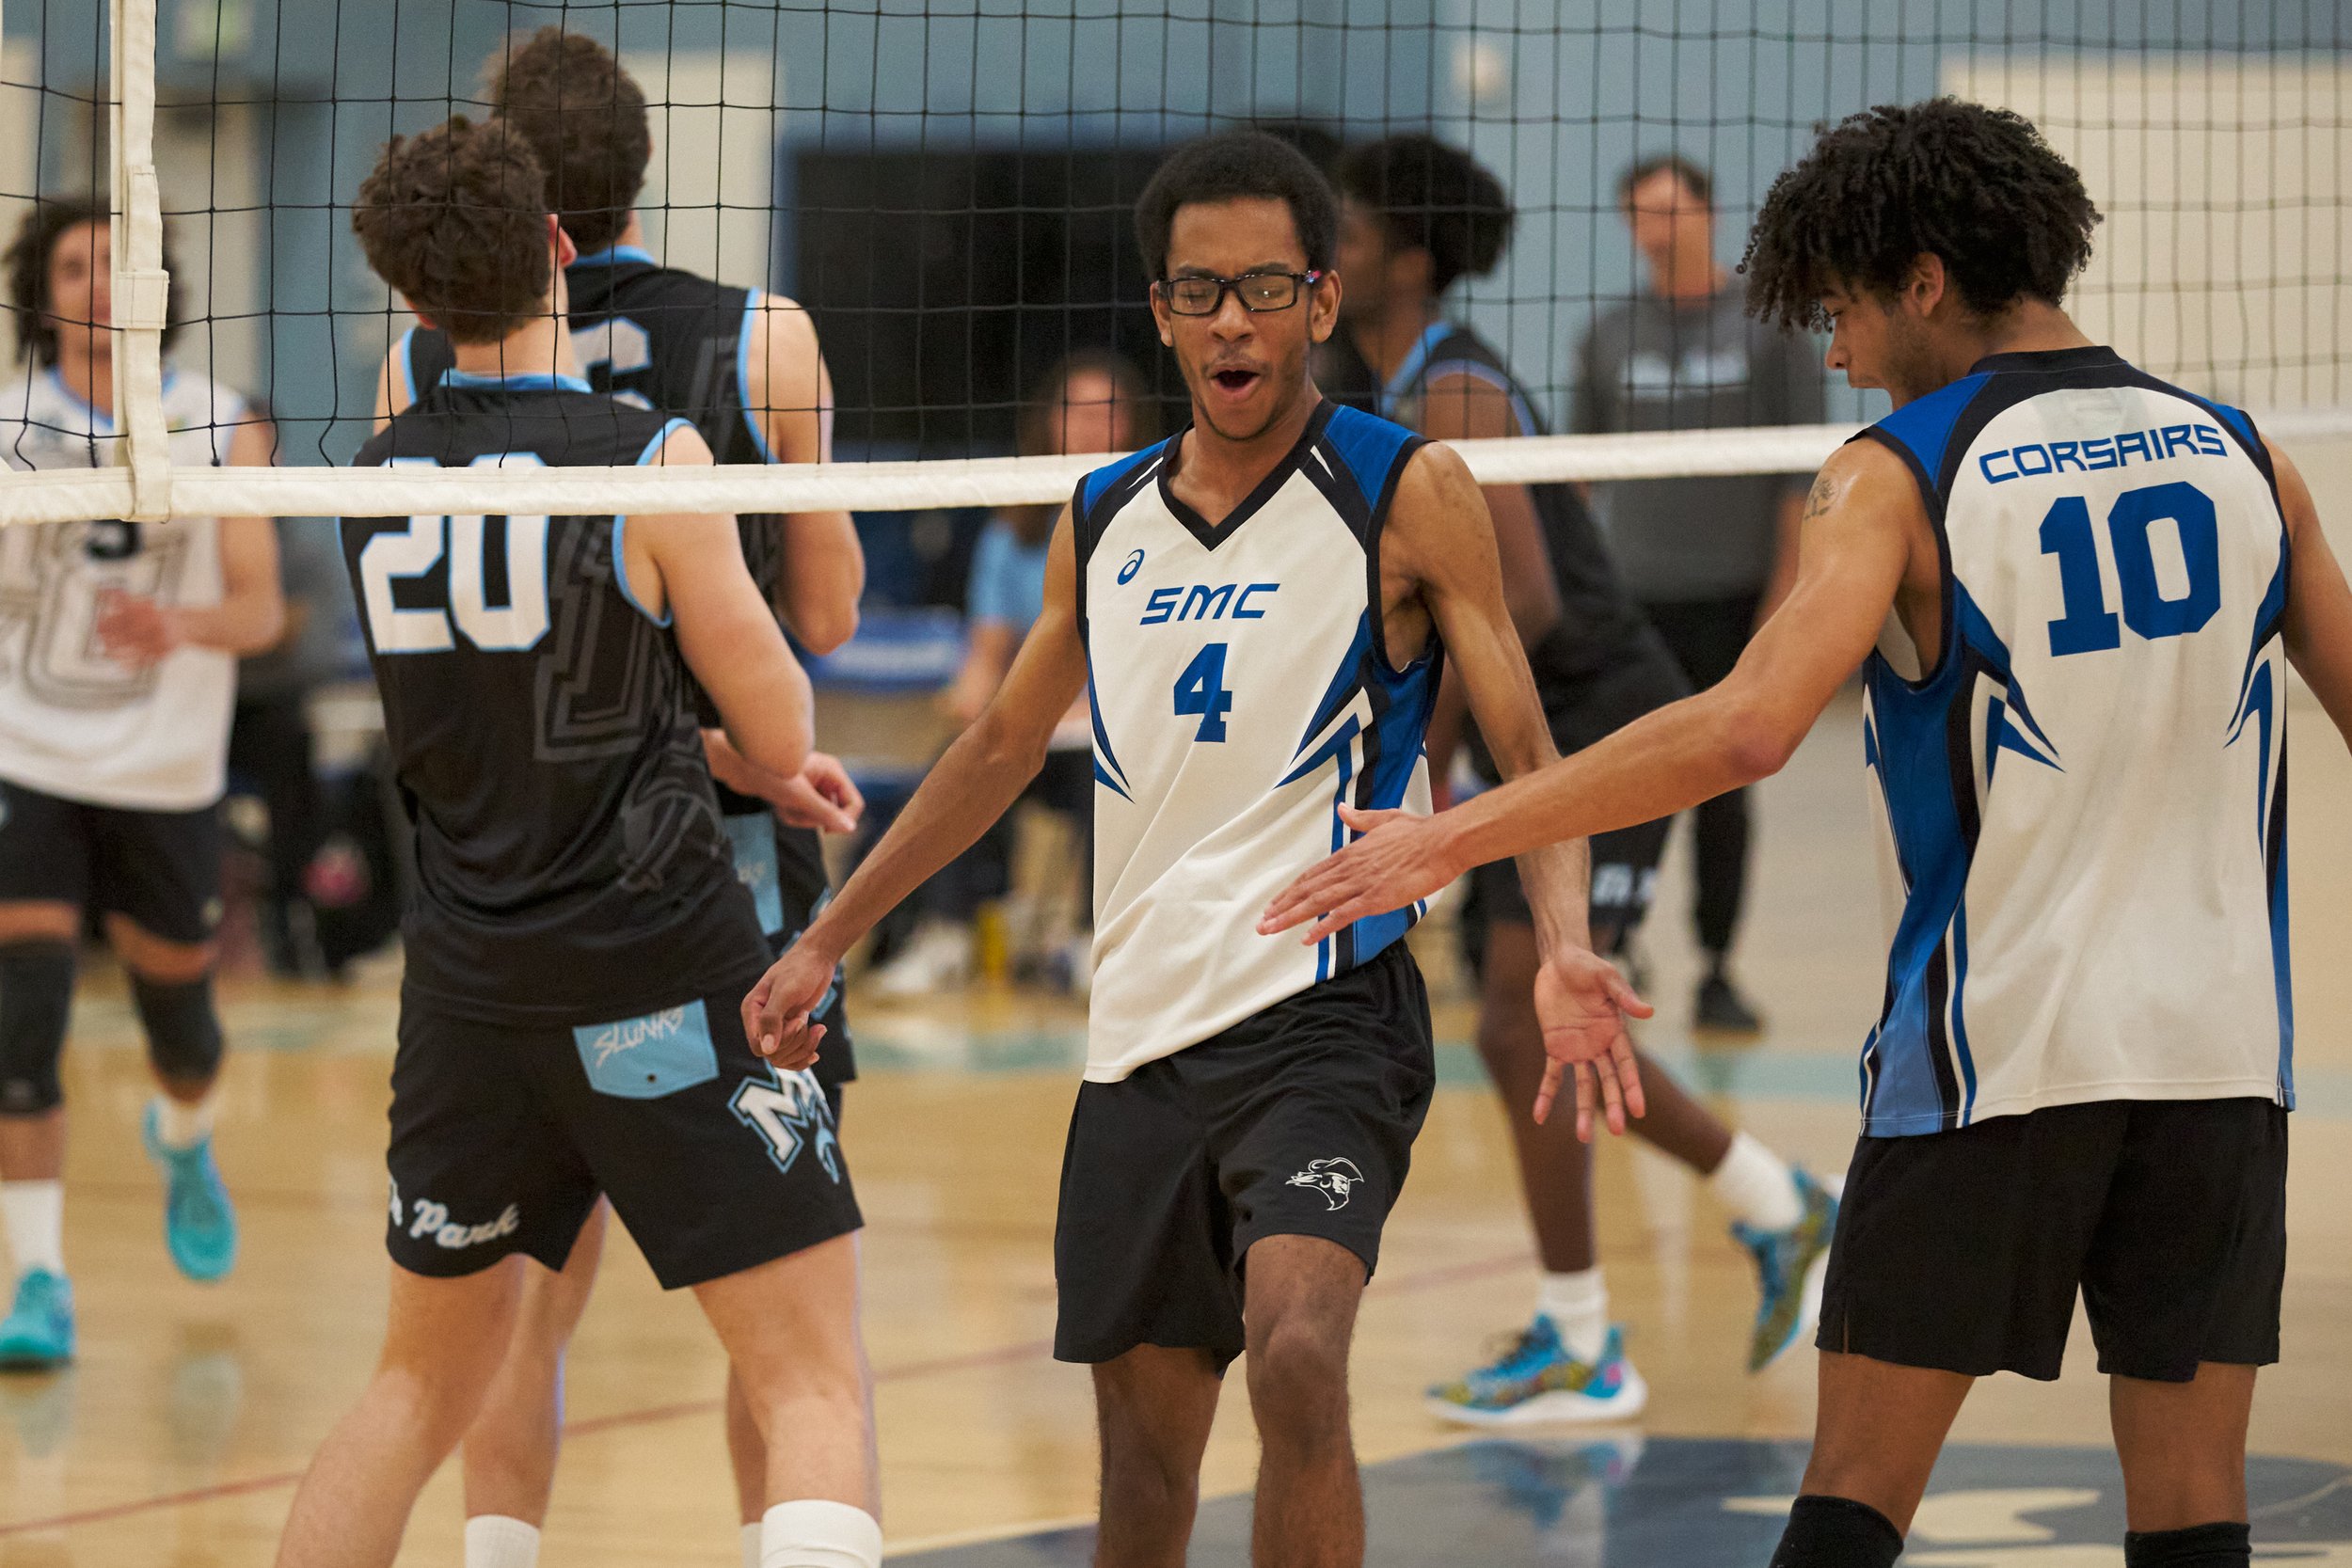  Santa Monica College Corsairs' Beikwaw Yankey (center) and Nate Davis (right) low-five after Yankey scored a kill during the men's volleyball match against the Moorpark College Raiders on Wednesday, April 12, 2023, at Corsair Gym in Santa Monica, Ca